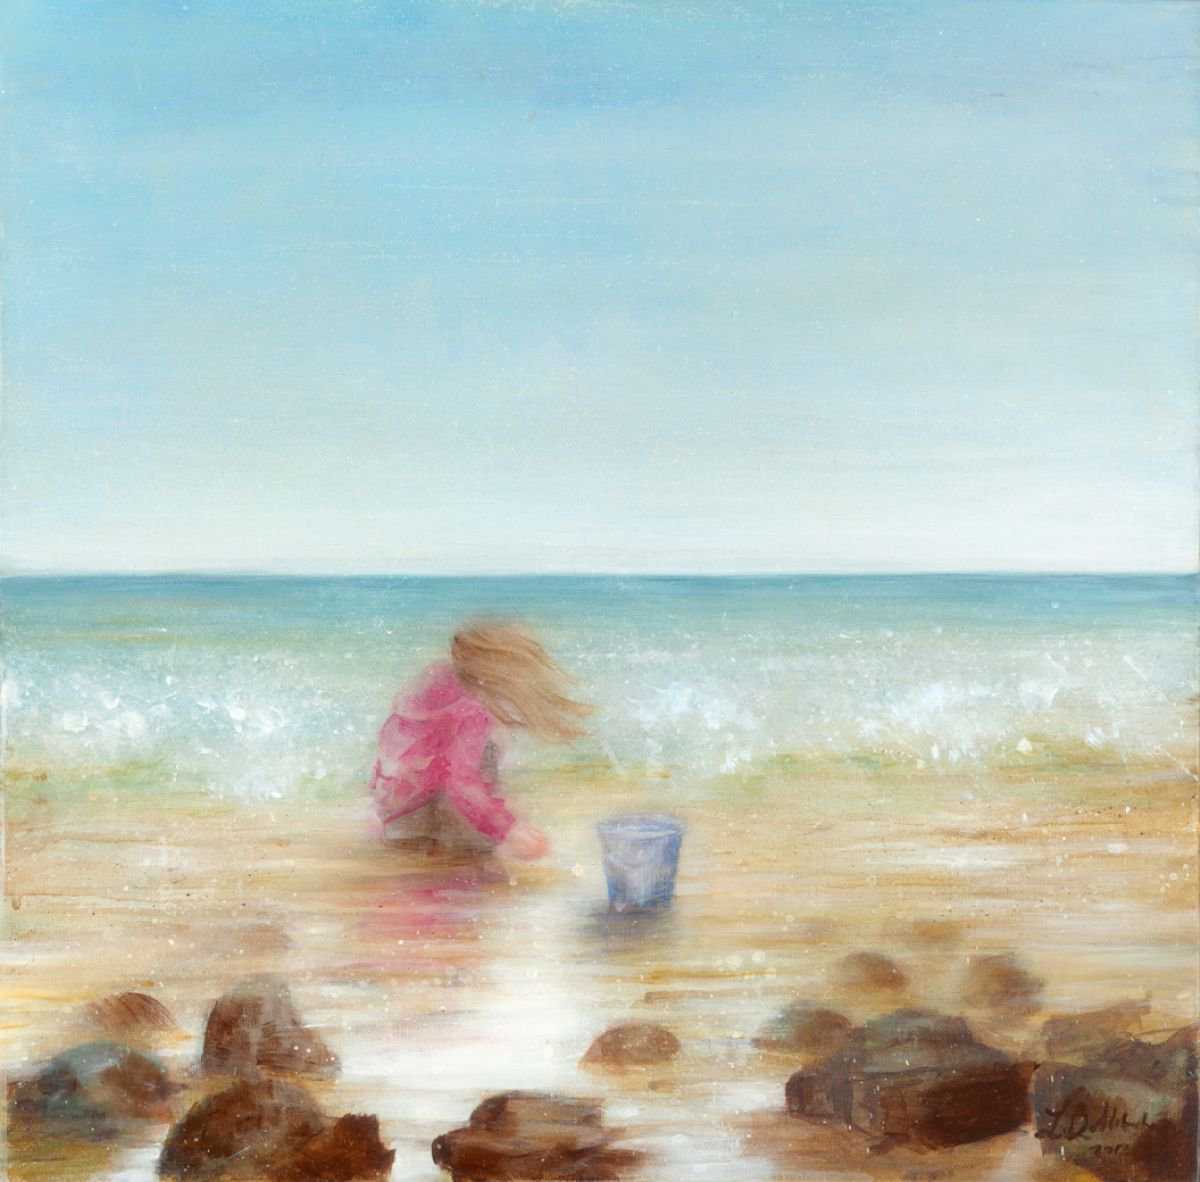 Collecting Shells by Lynne Bellchamber